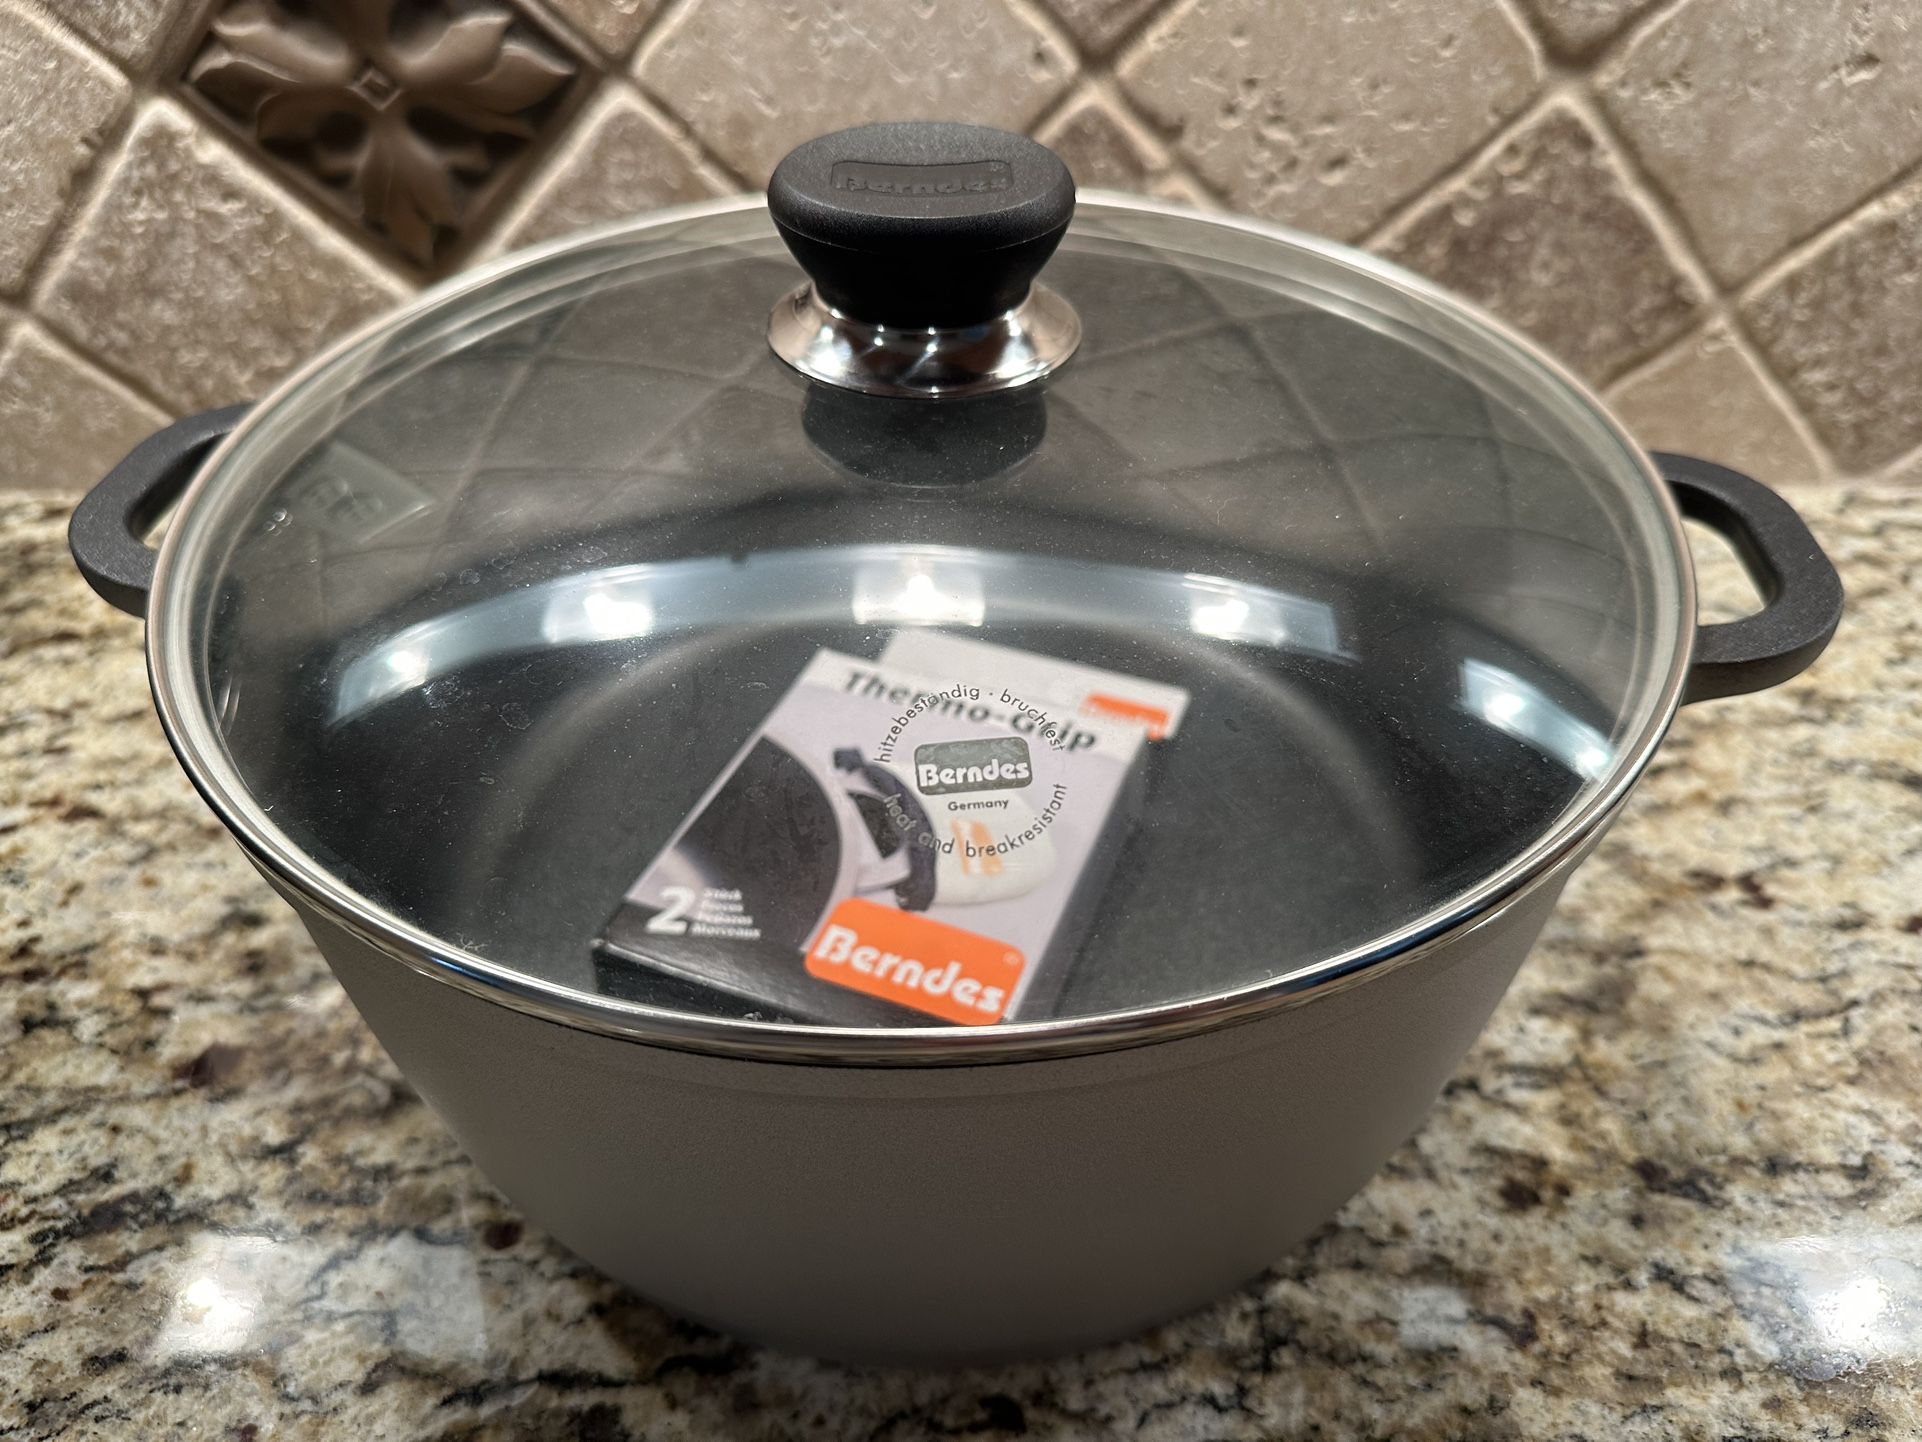 12-Qt Berndes Made In Germany for Sale in West Linn, OR - OfferUp